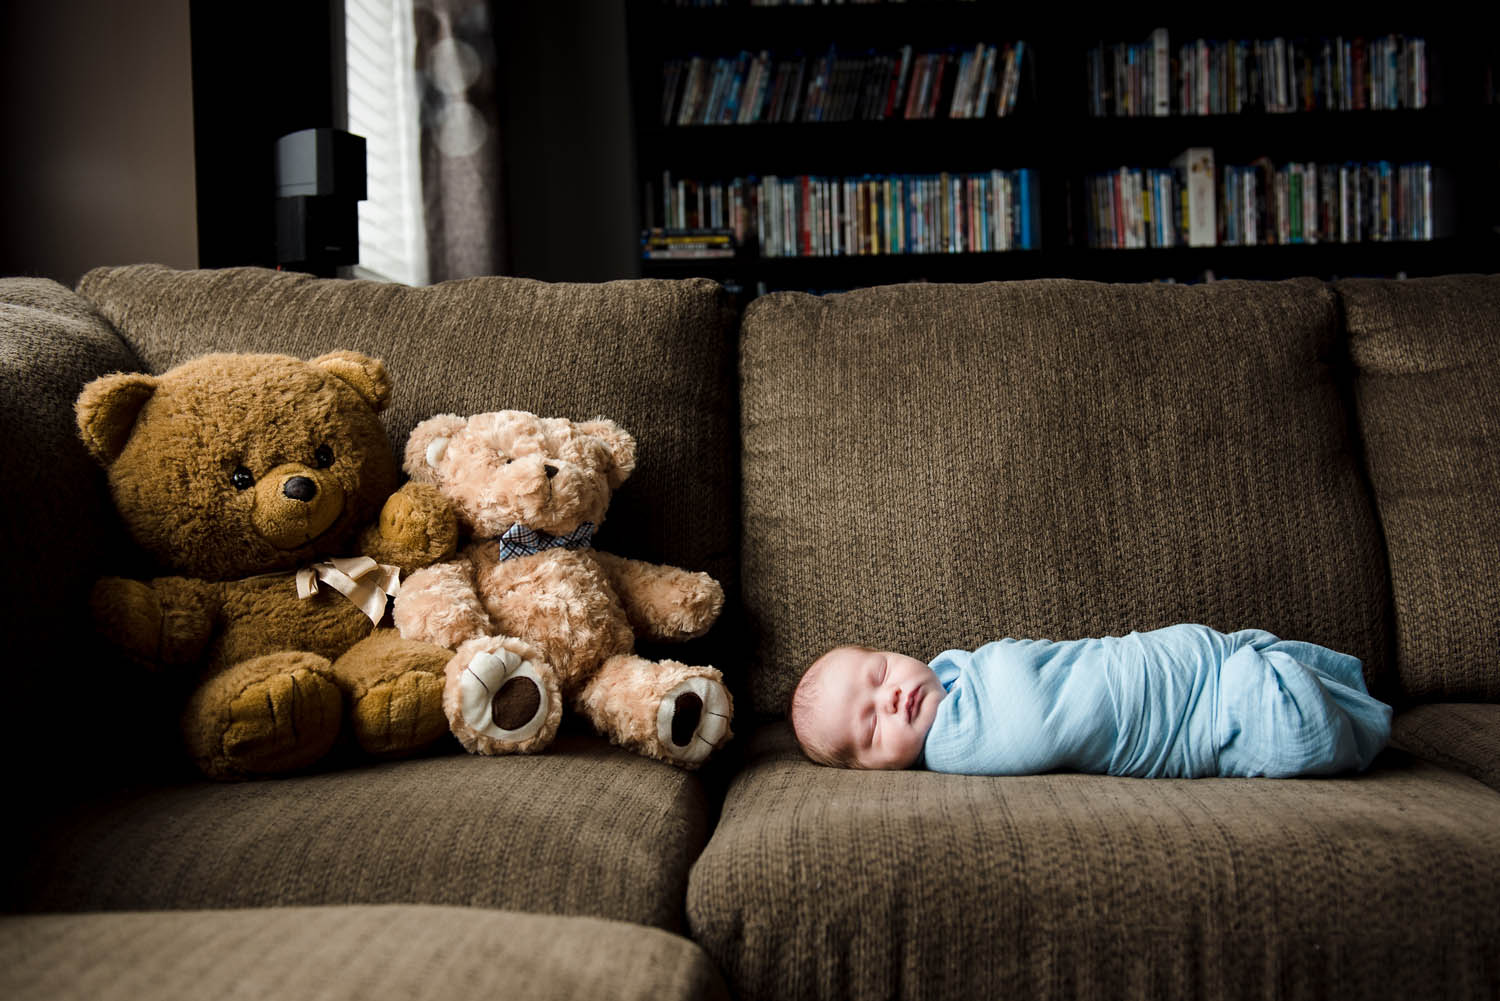 A newborn baby in his Sherwood Park home surrounded by family heirlooms